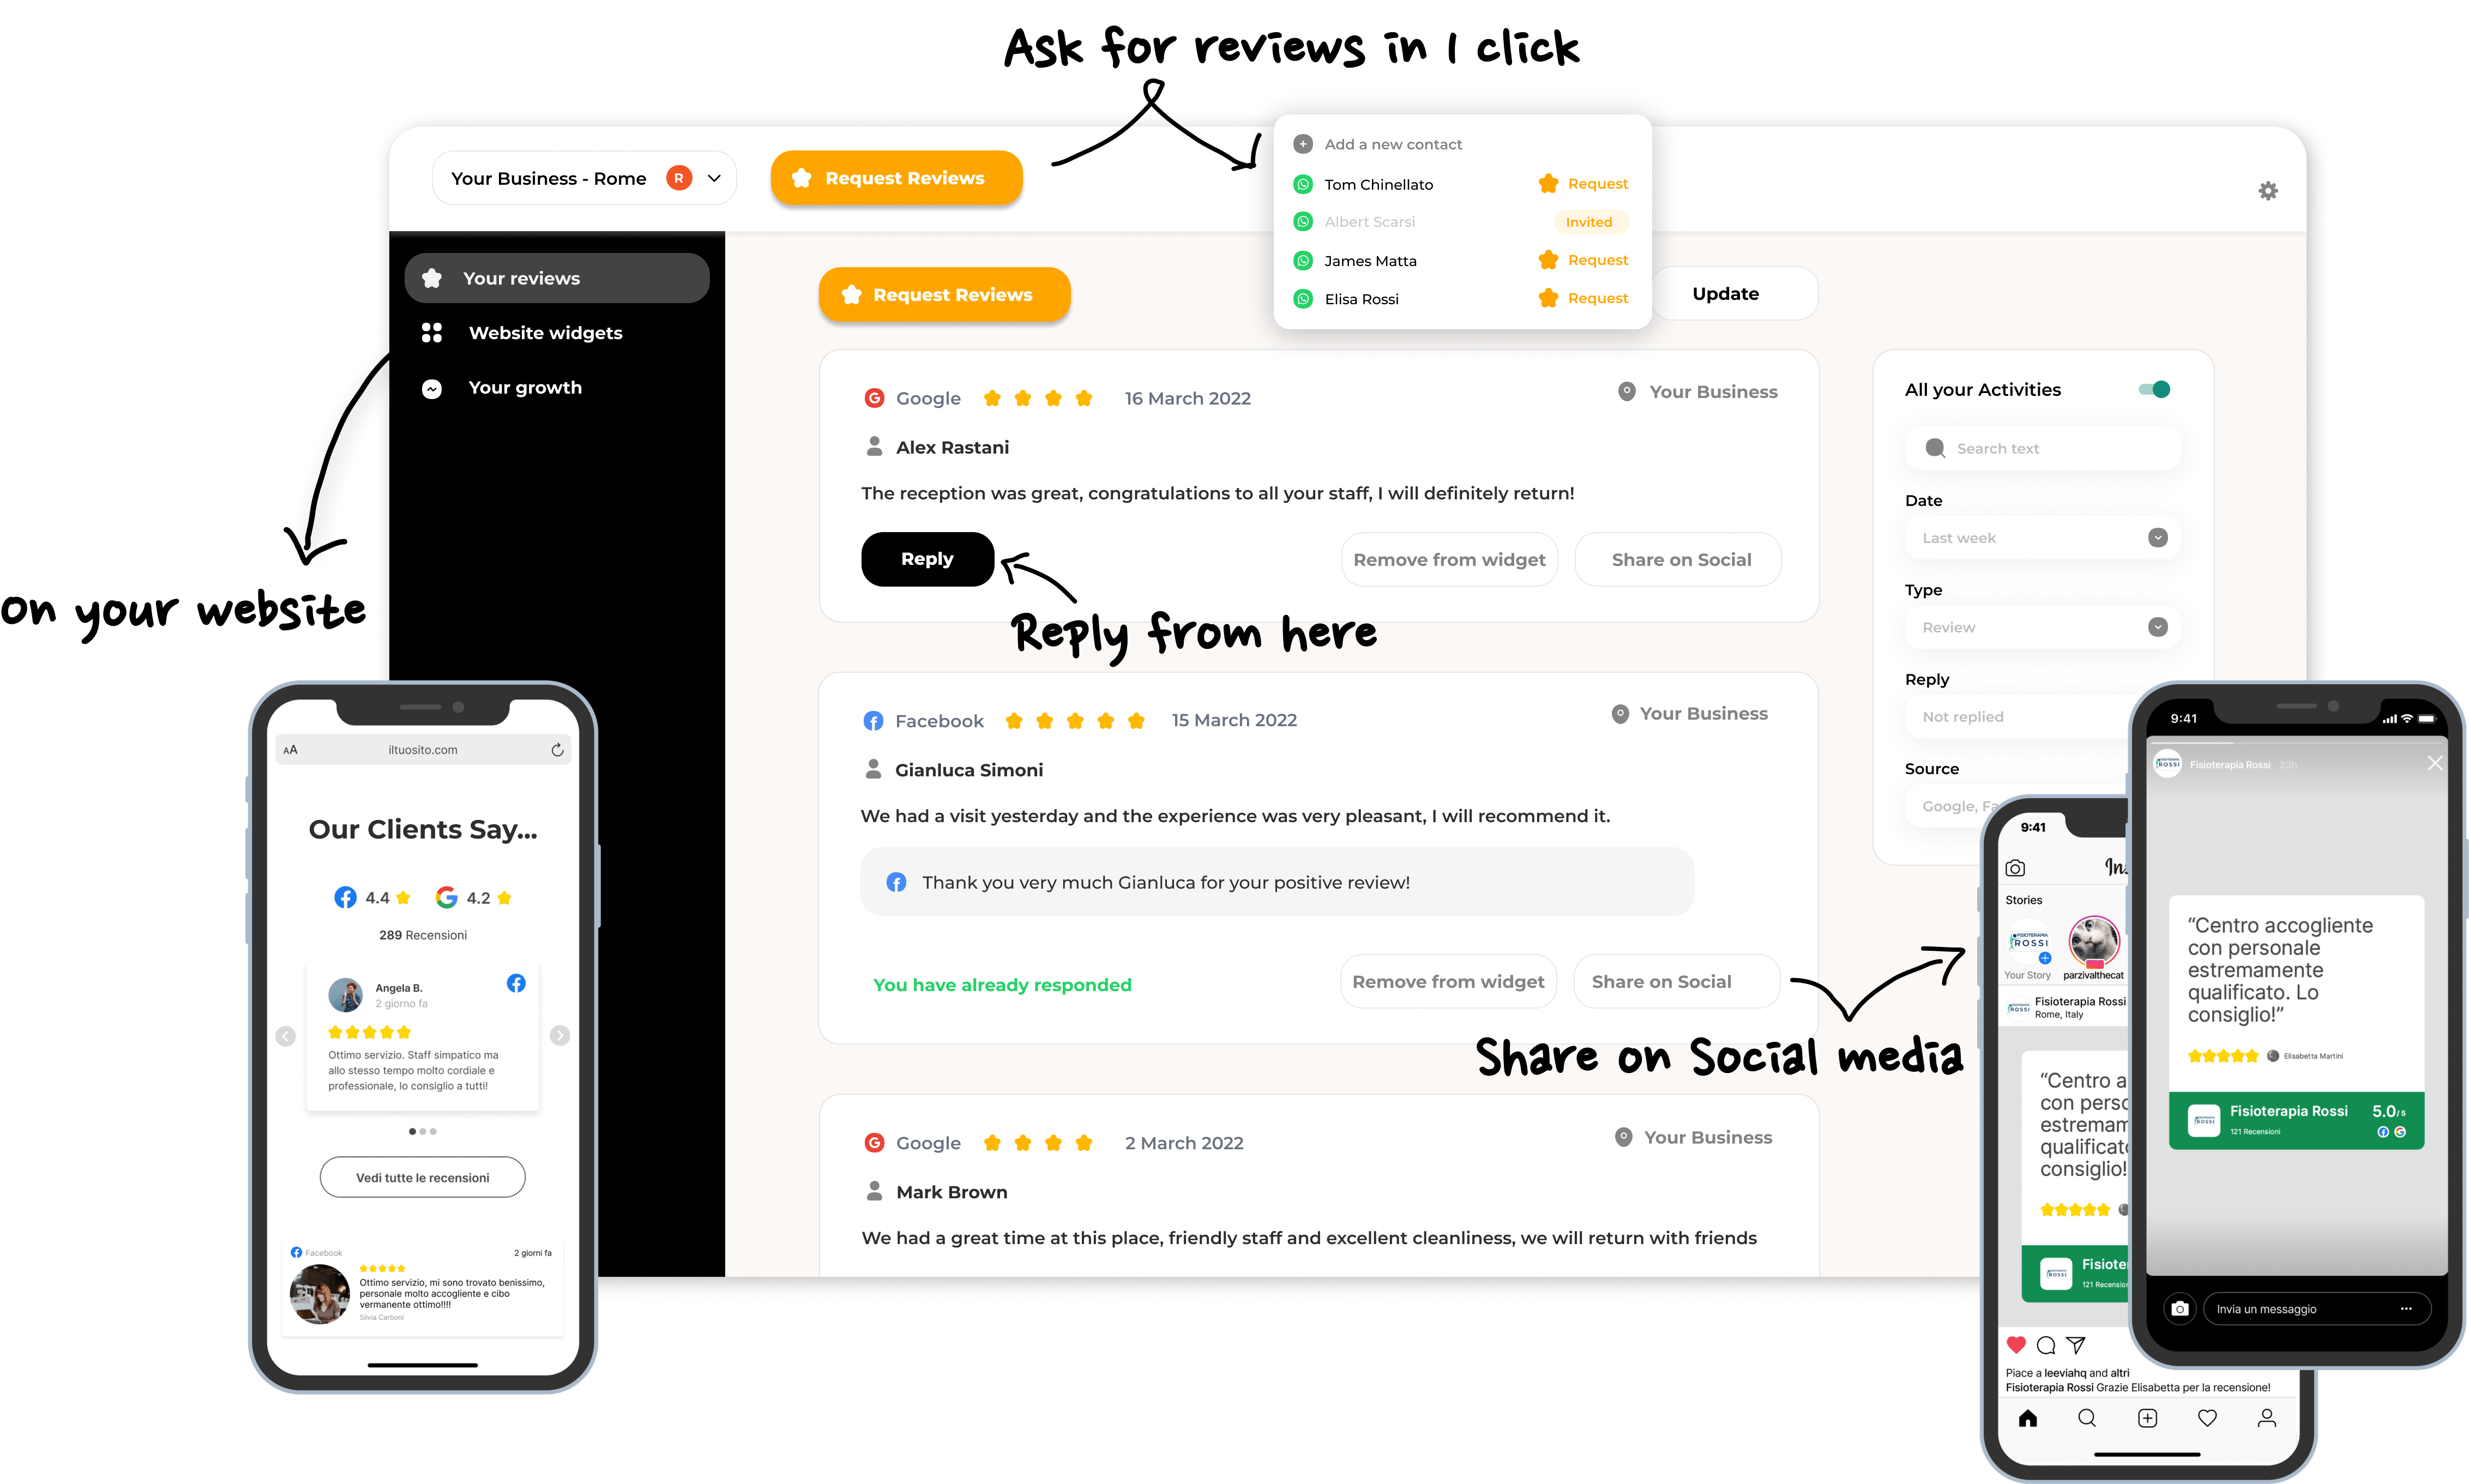 A mobile app for reputation management, specifically designed to help businesses monitor and respond to Google reviews. The app can be accessed on both mobile phones and tablets, providing a convenient tool for managing and